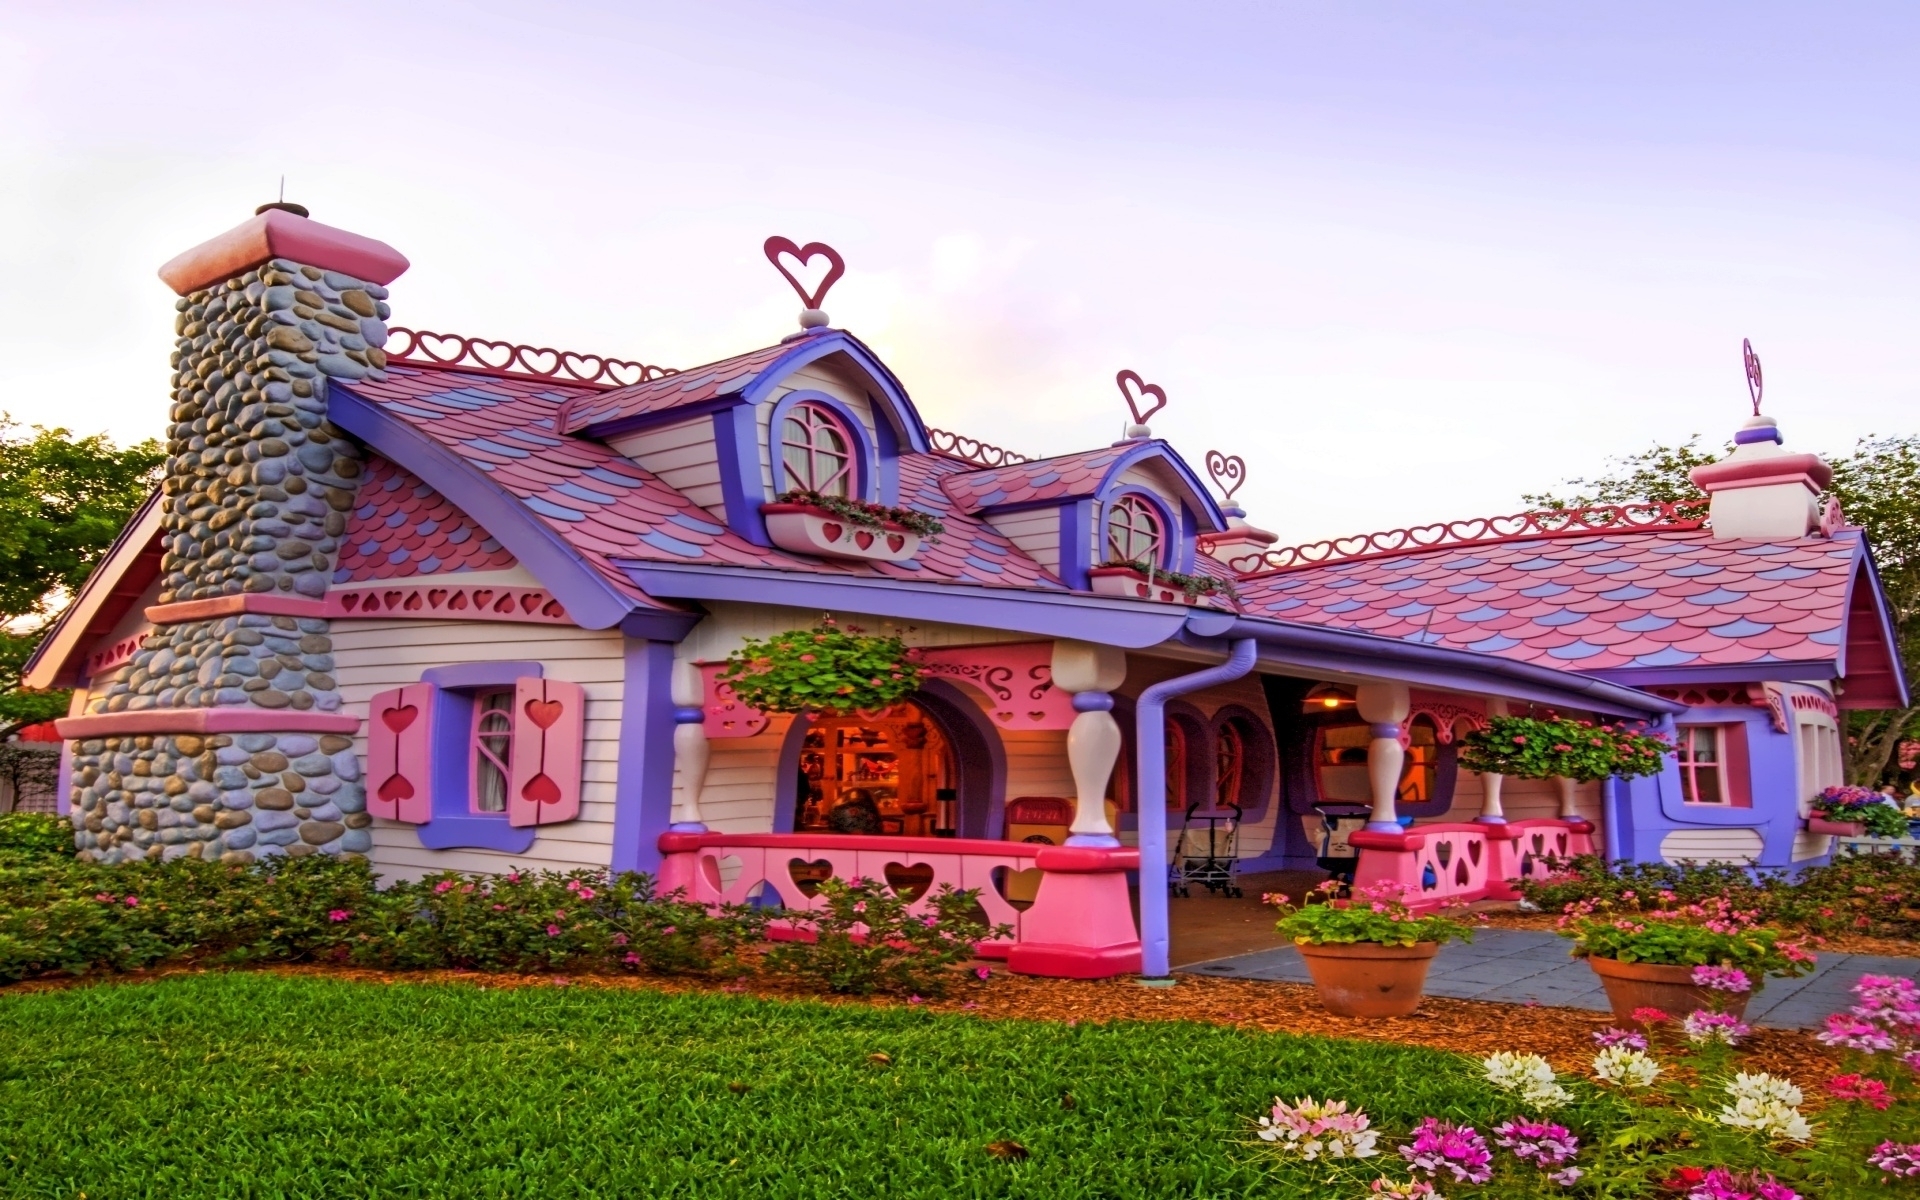 house wallpaper hd,home,house,property,pink,building